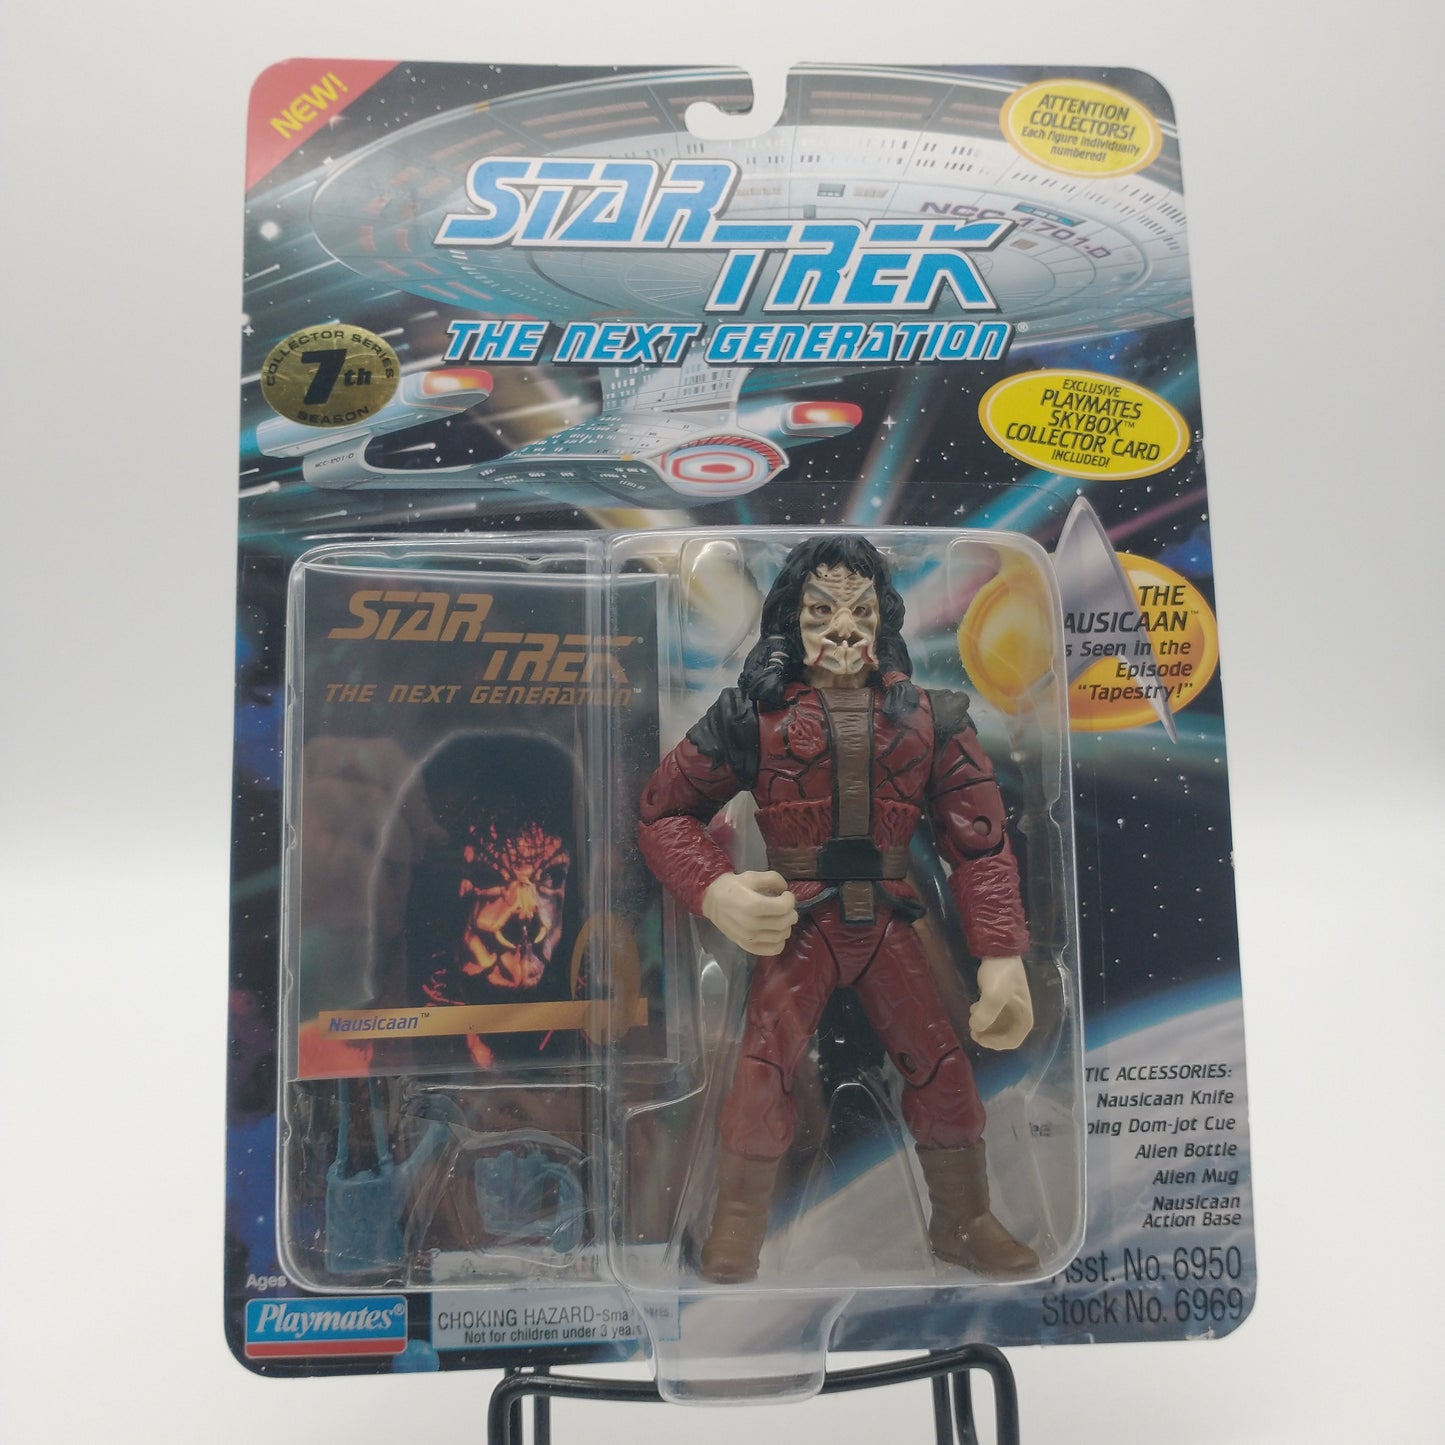 The front of the box and bubble. The bubble is sealed, the action figure is inside.